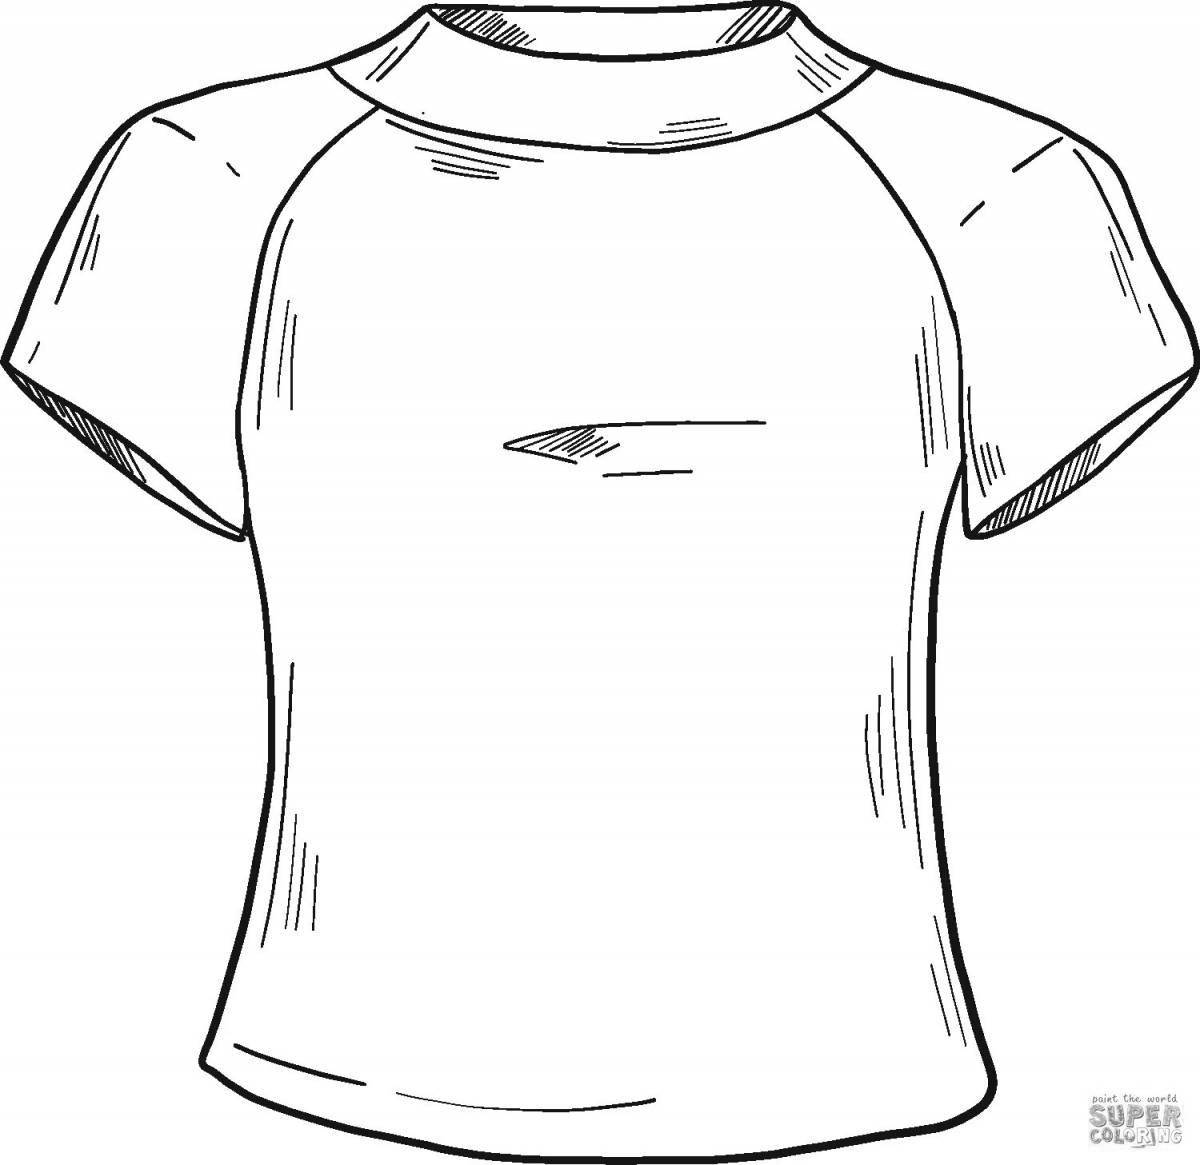 Coloring page with colorful t-shirt